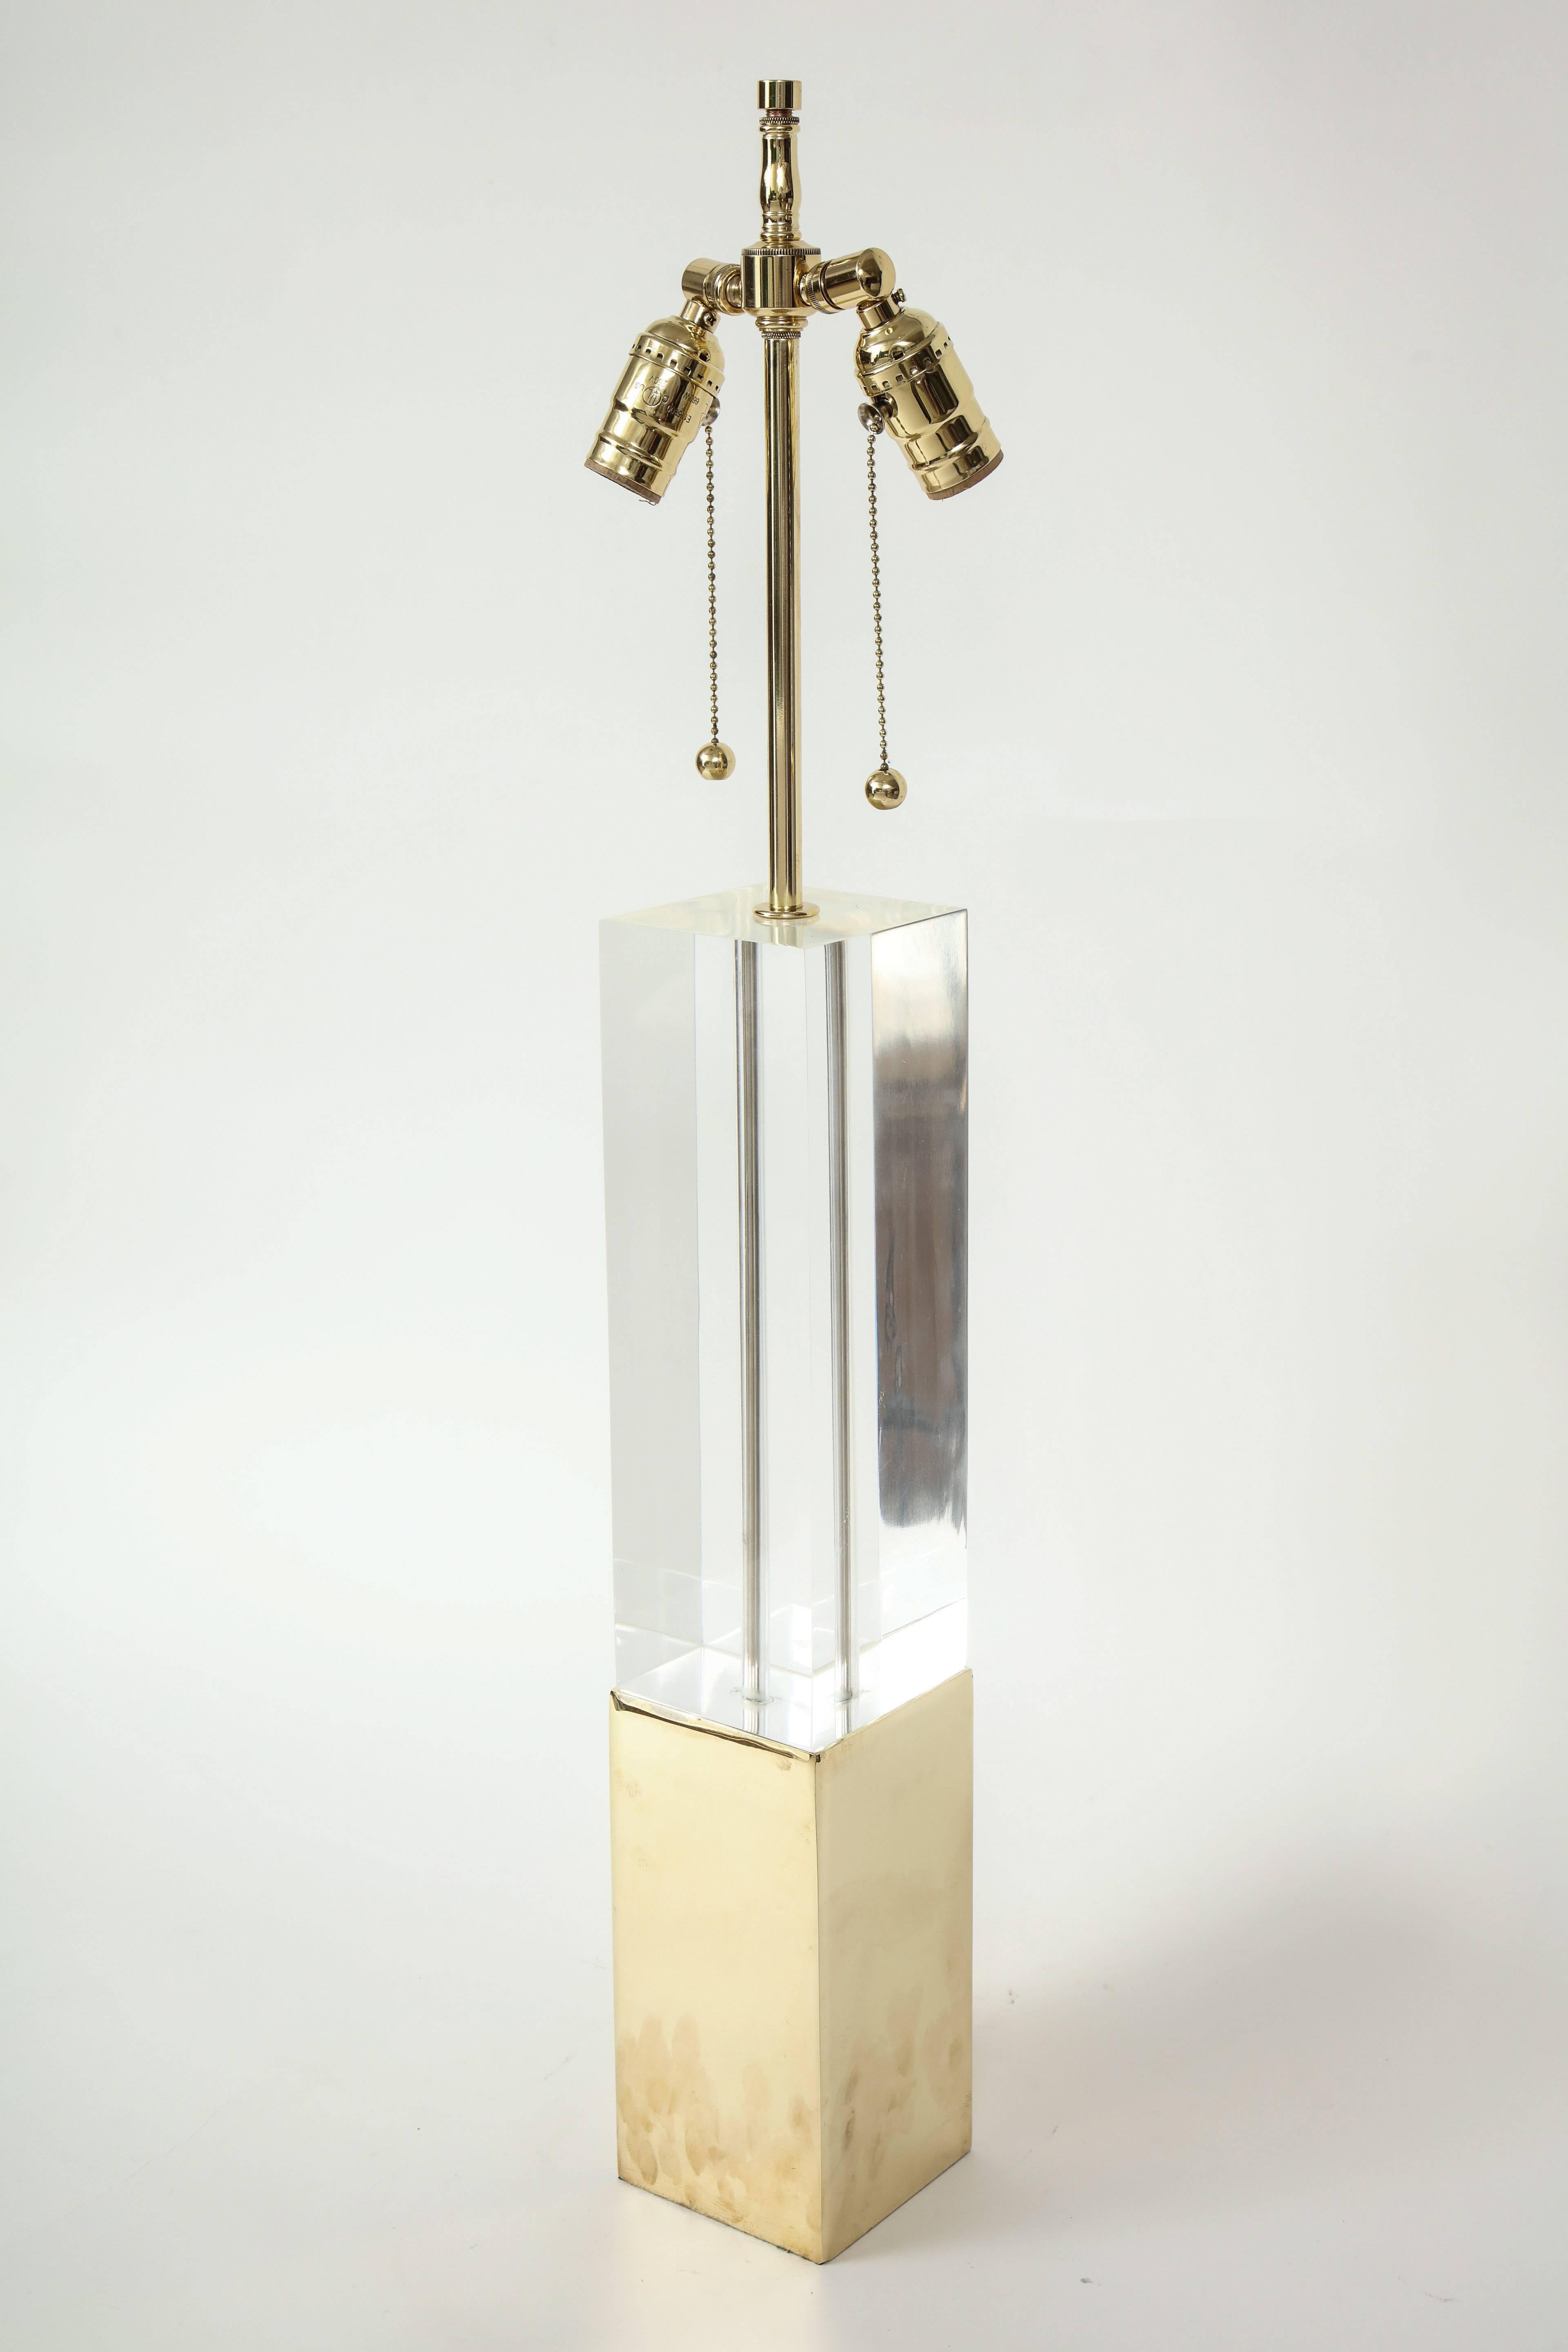 Striking pair of rectangular column lamps composed of solid Lucite columns resting on polished brass bases. Lamps feature brass double pull chain sockets. Rewired for use in the USA.